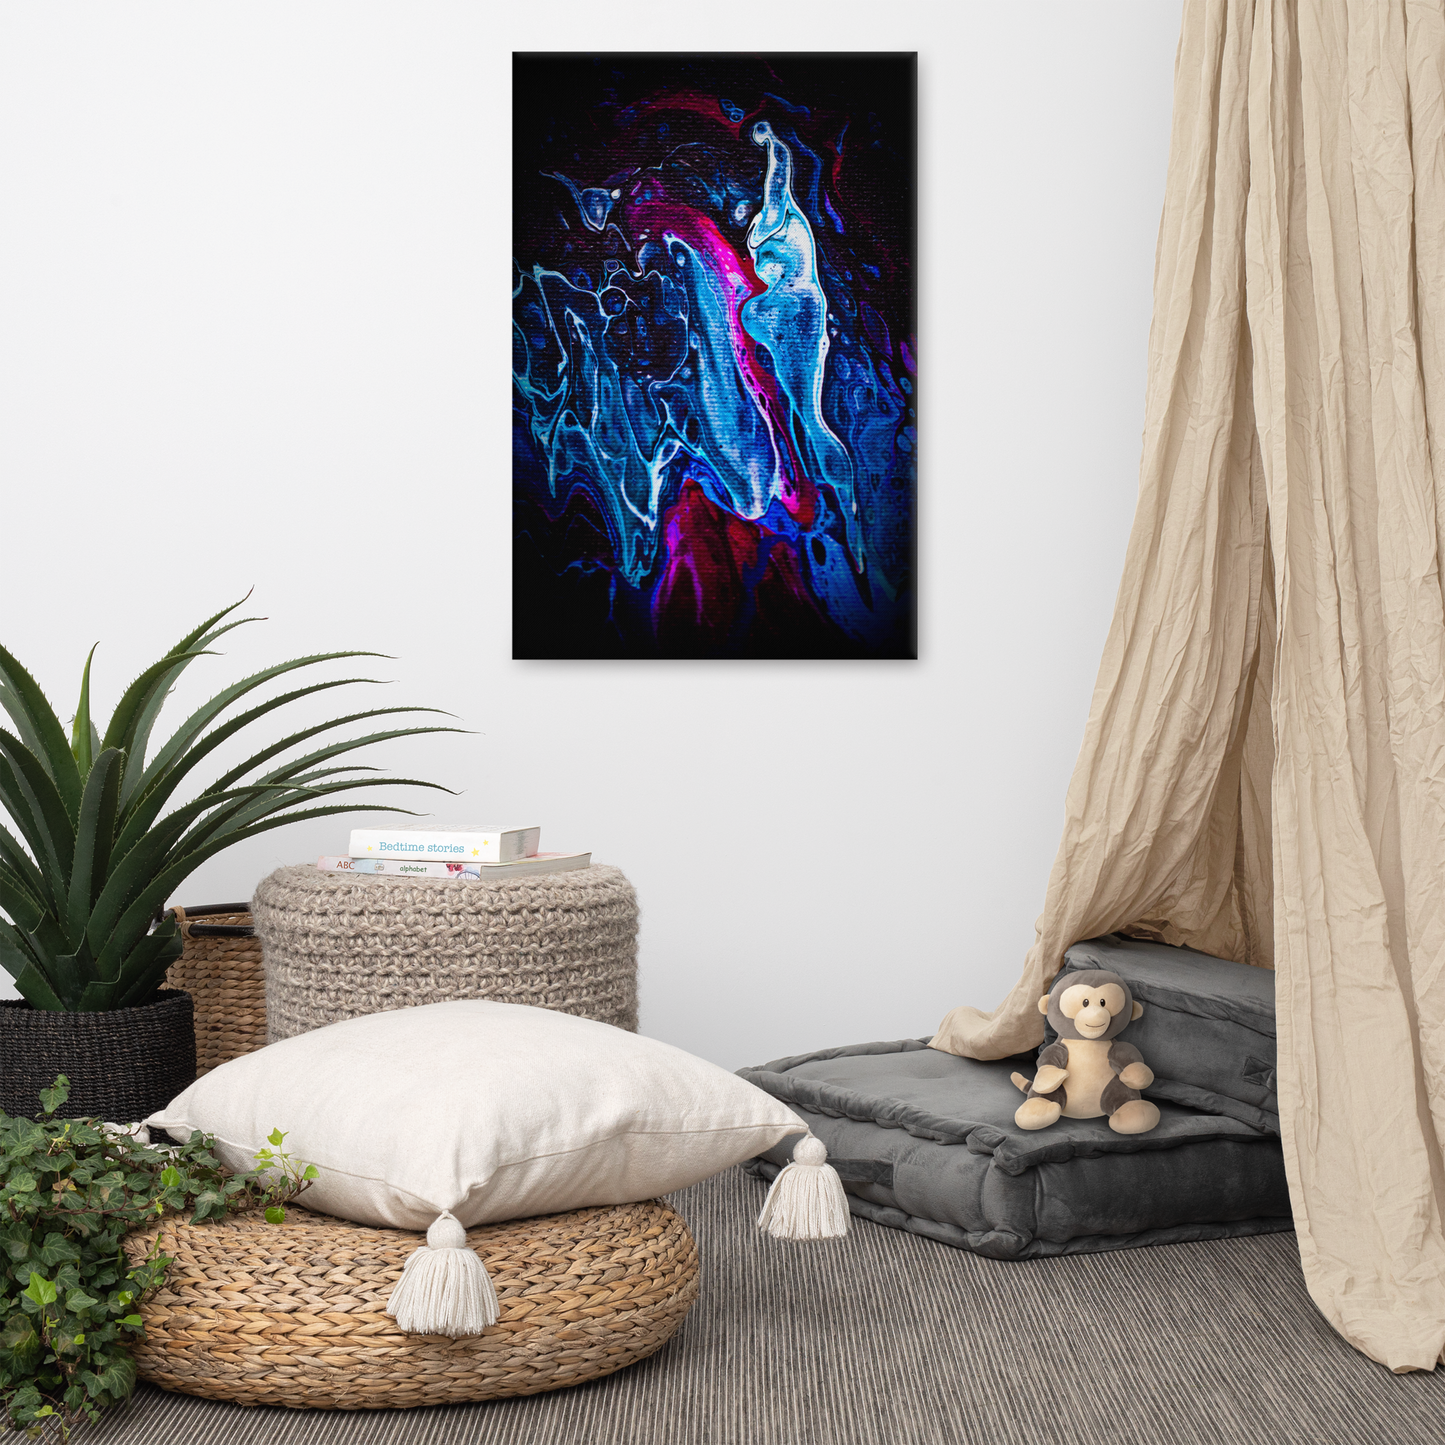 NightOwl Studio Abstract Wall Art, Blue Liquid, Boho Living Room, Bedroom, Office, and Home Decor, Premium Canvas with Wooden Frame, Acrylic Painting Reproduction, 24” x 36”